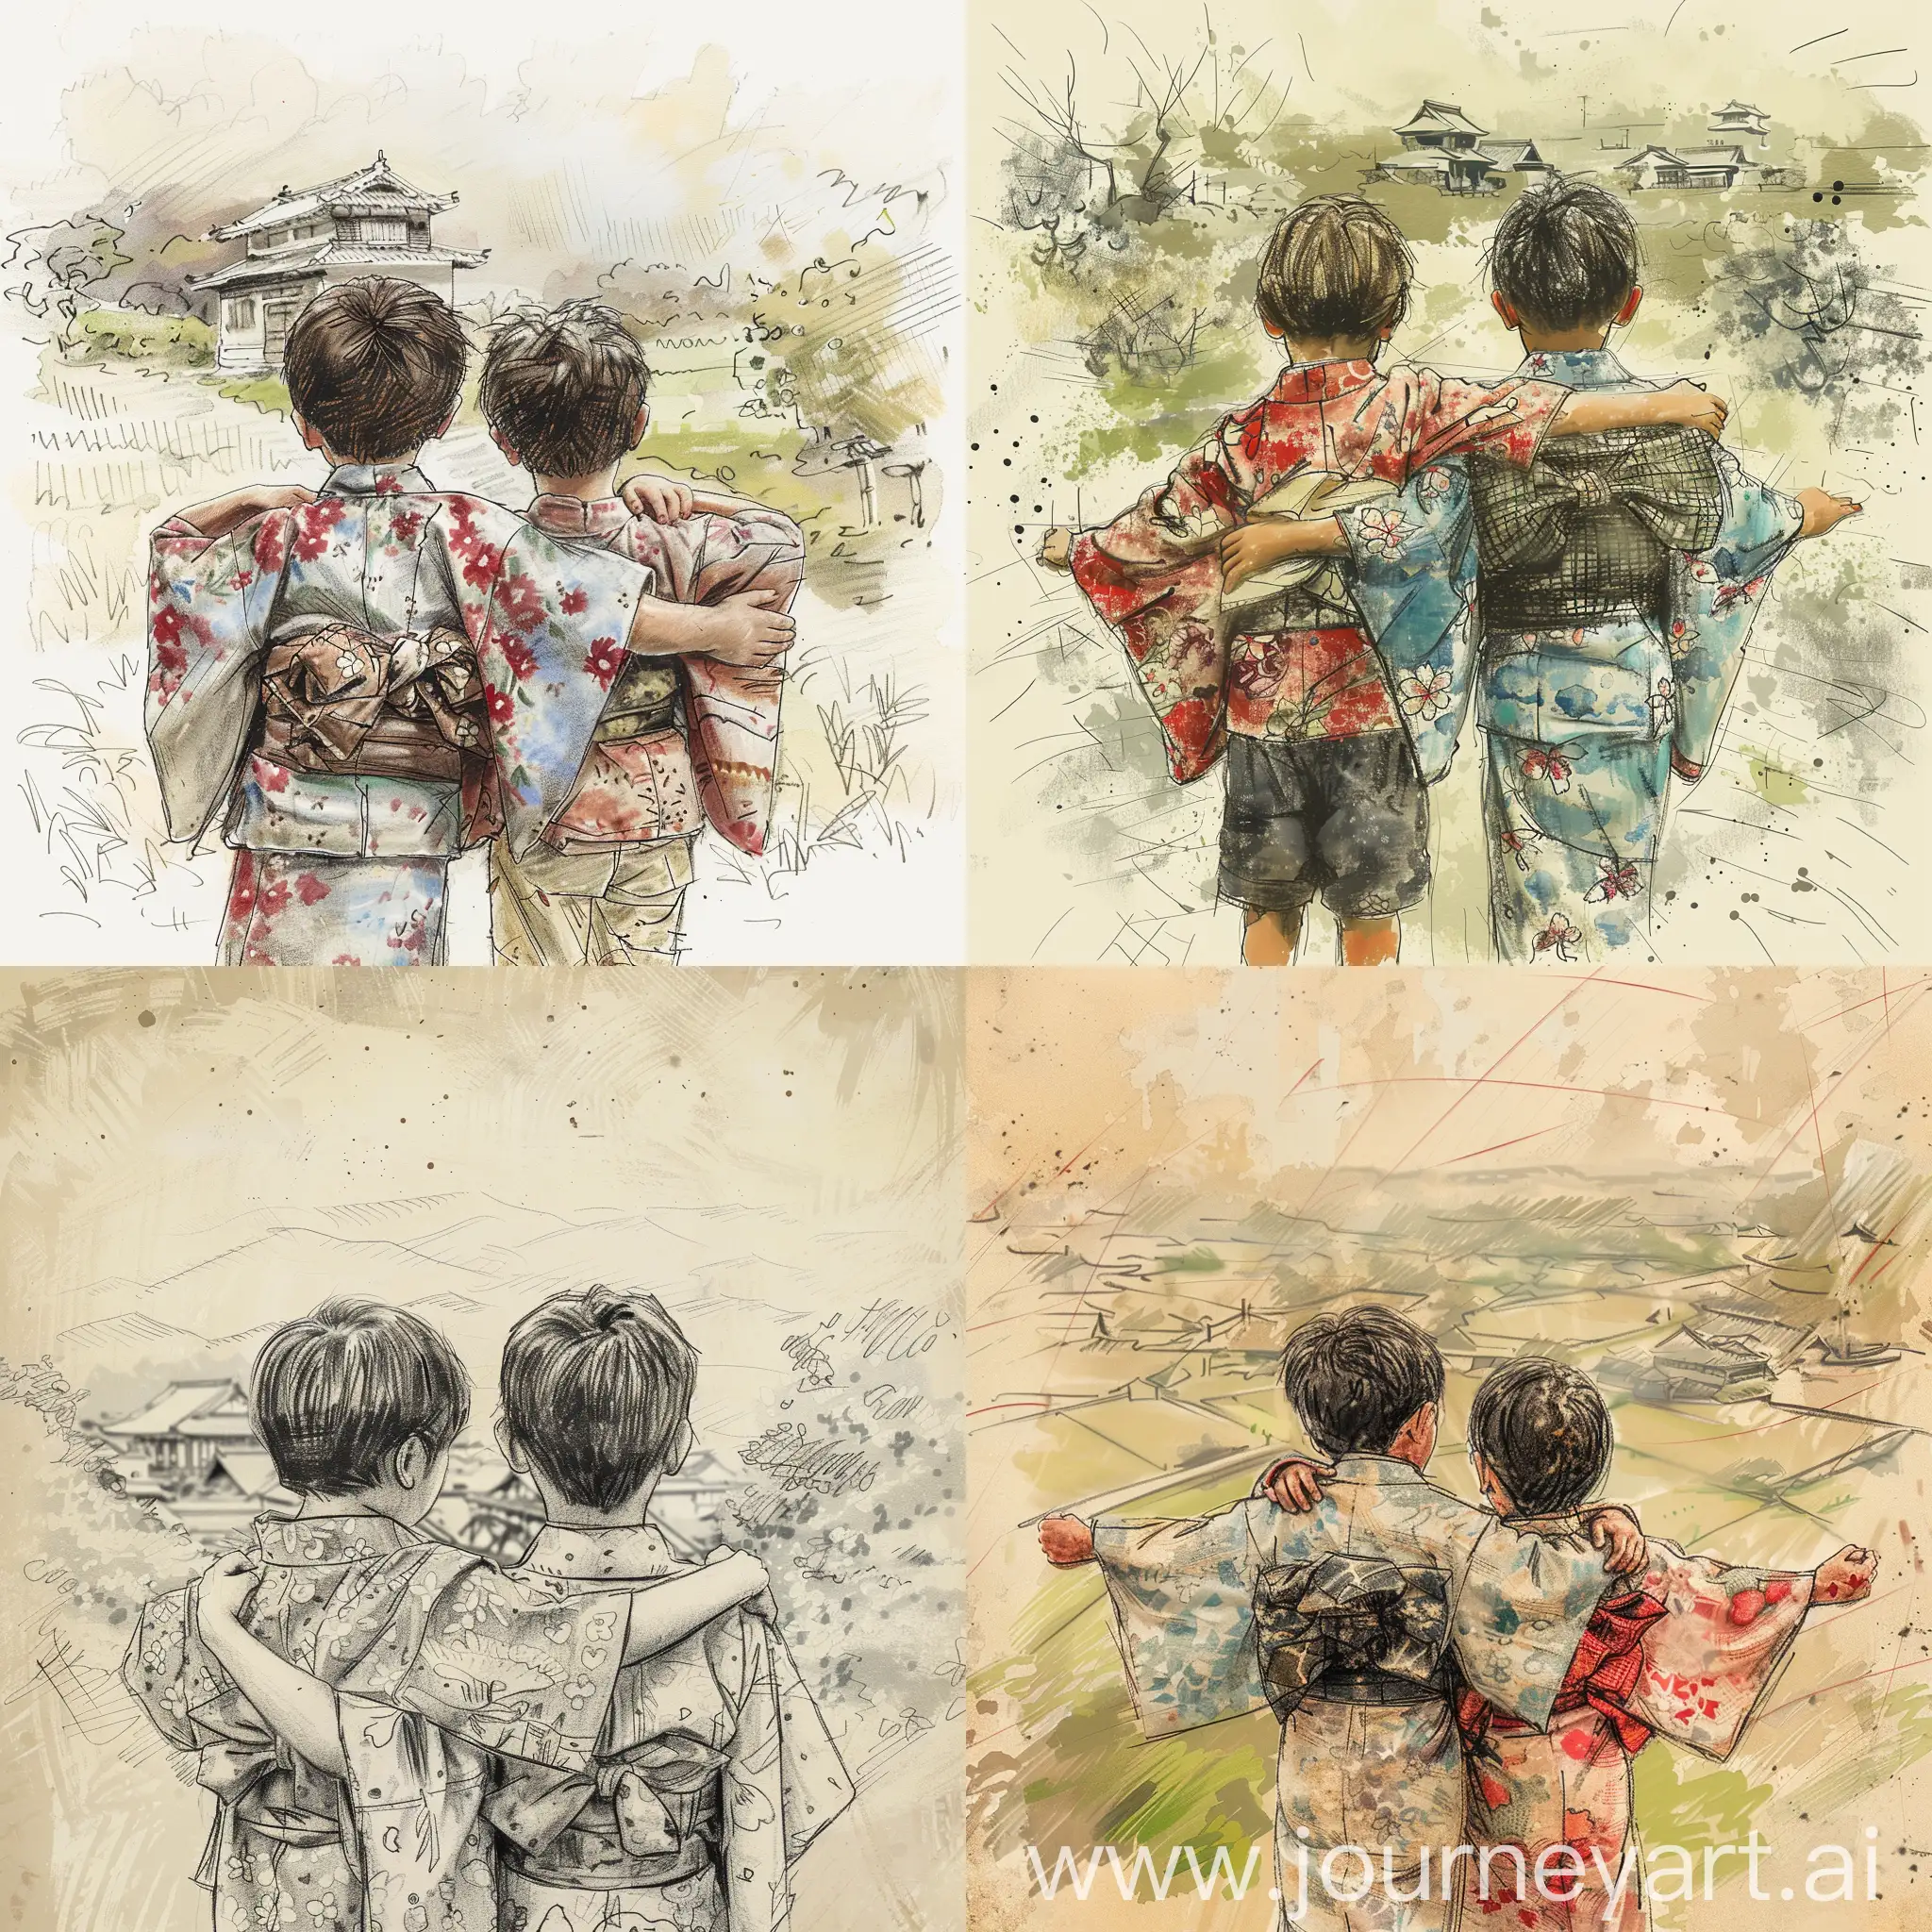 Two boy friends in old kimonos Japanese children look back with their arms around each other's shoulders. Japan has a rich tradition of storytelling and whimsical. Create a collaborative story that incorporates elements of these artistic styles. A turbulent past and the tenacious spirit of the Japanese people, preschool kids drawing, naive and unstrained touch of pencil scribbled, hand drawn, scrawled blur of Japanese countryside in the background. bird's eye view, simple